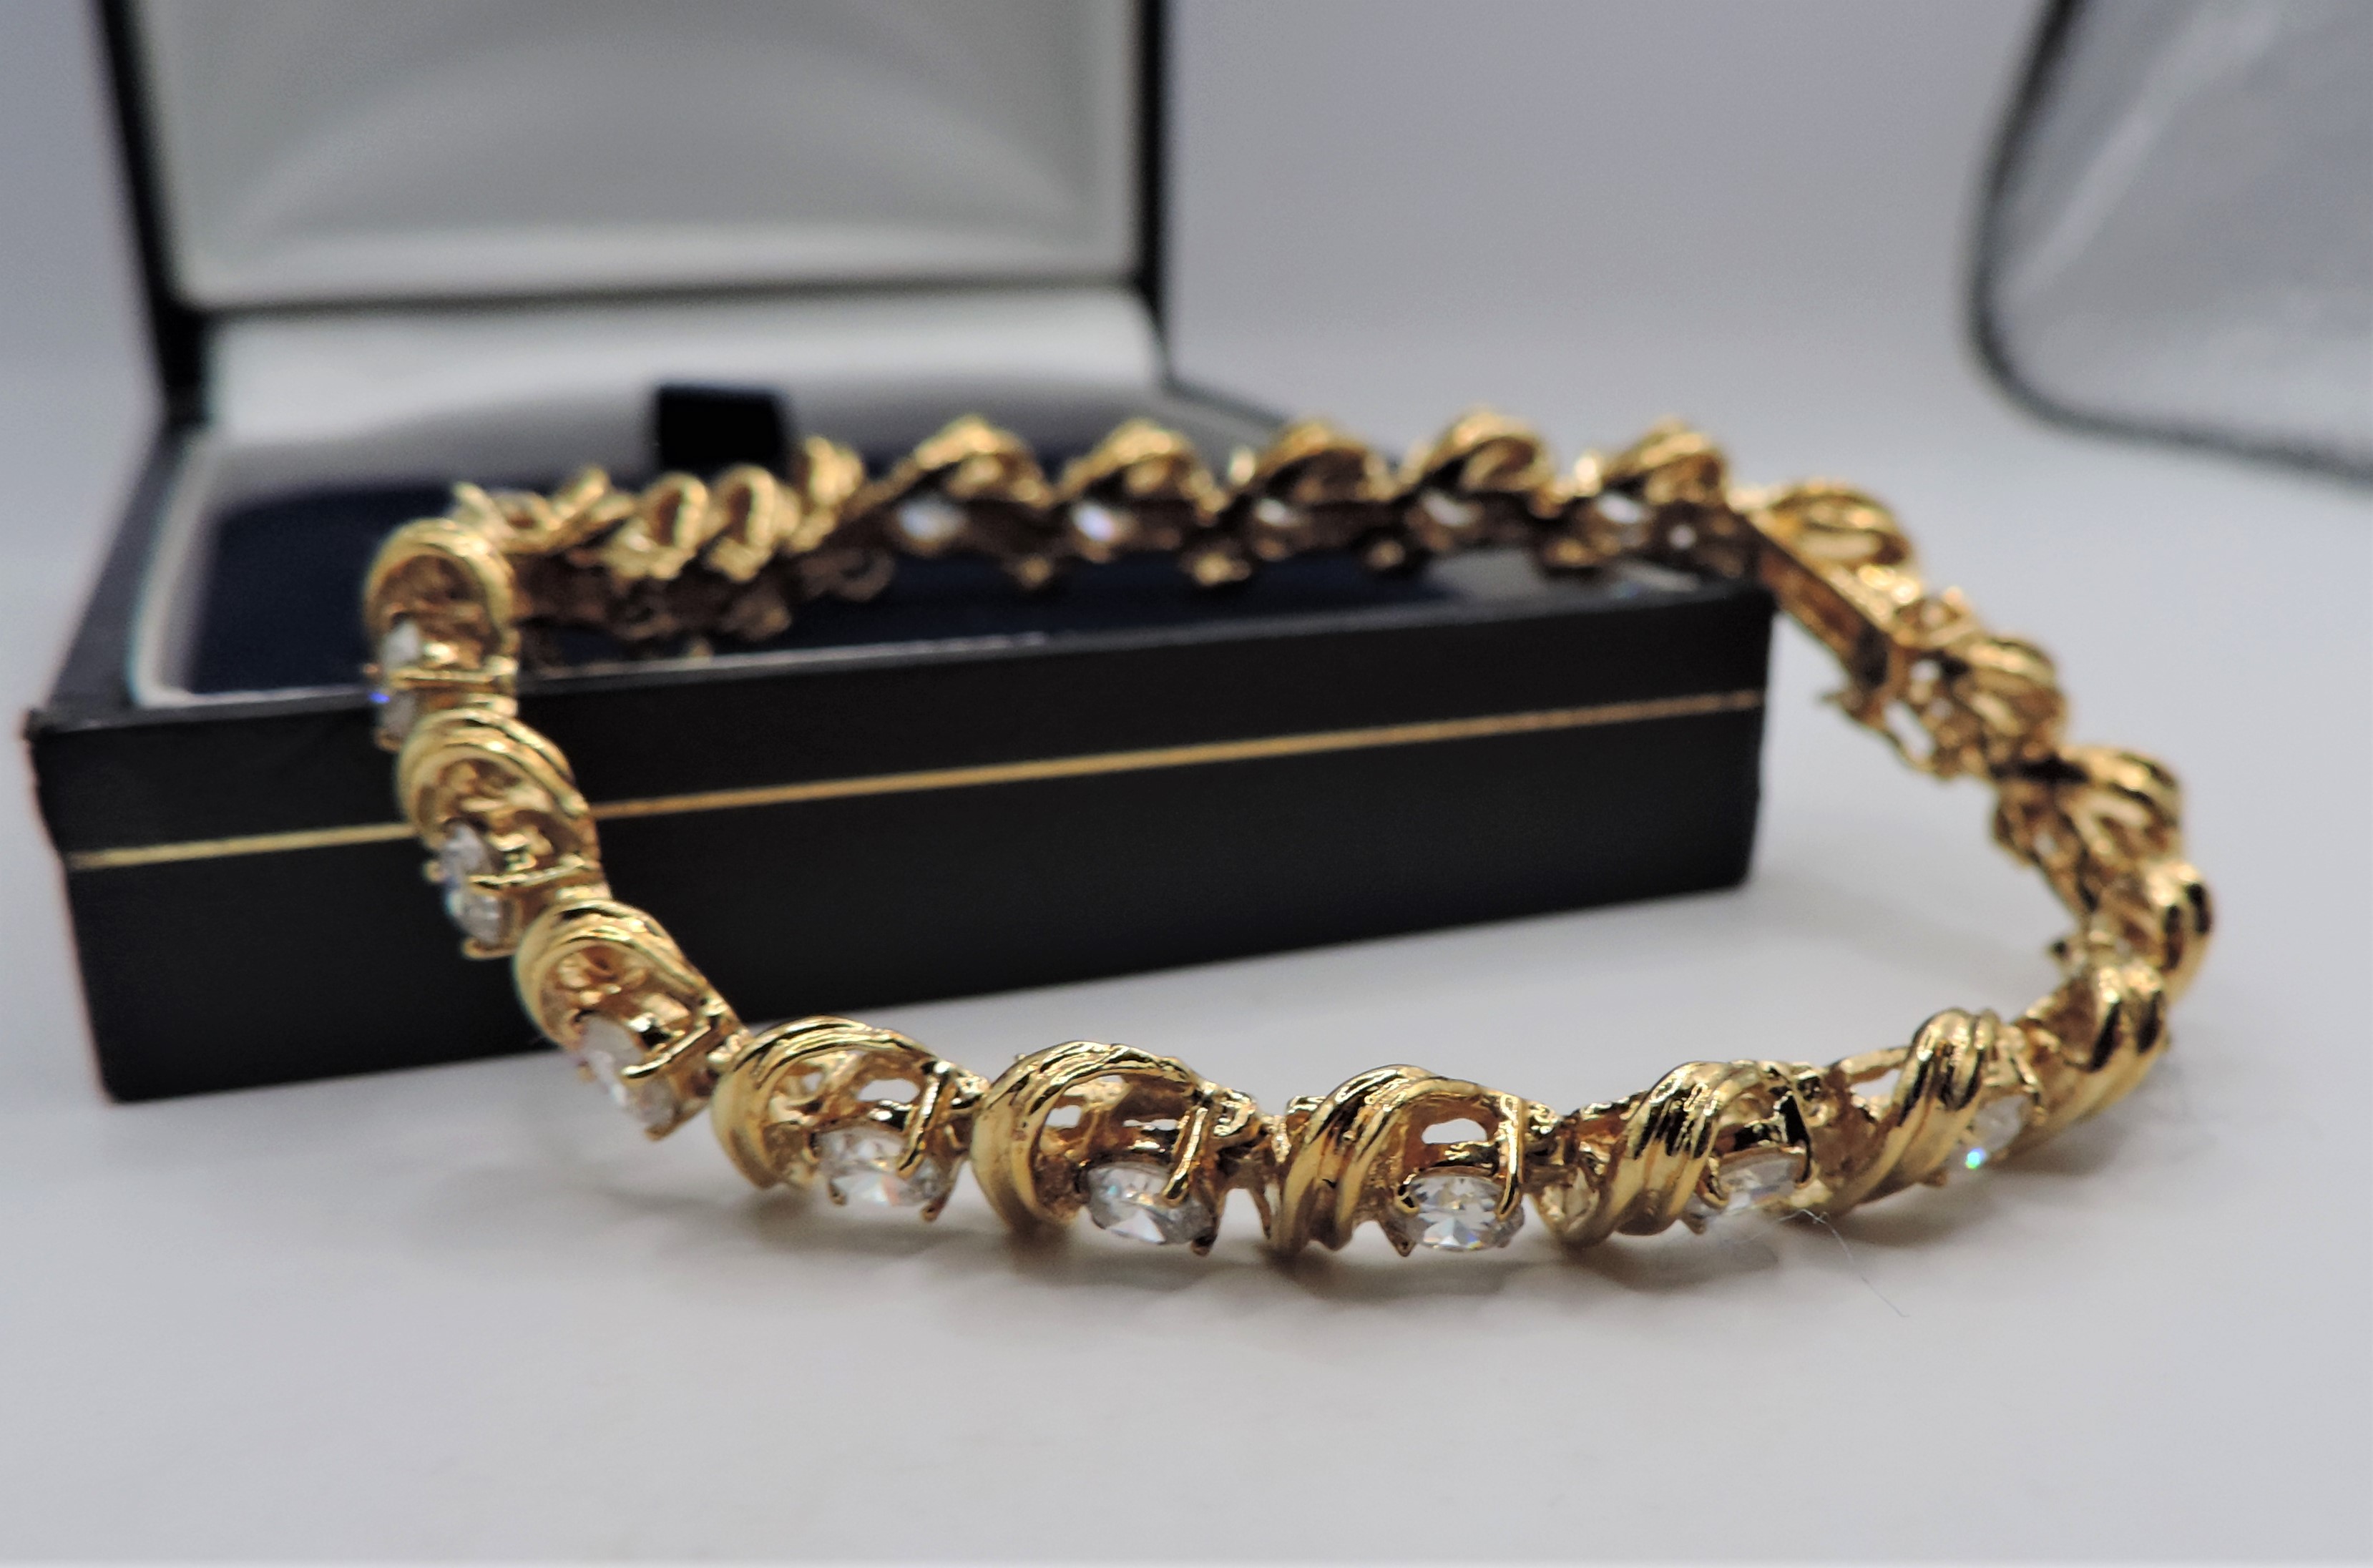 Gold on Sterling Silver White Zircon Gemstone Bracelet New with Gift Box - Image 3 of 3